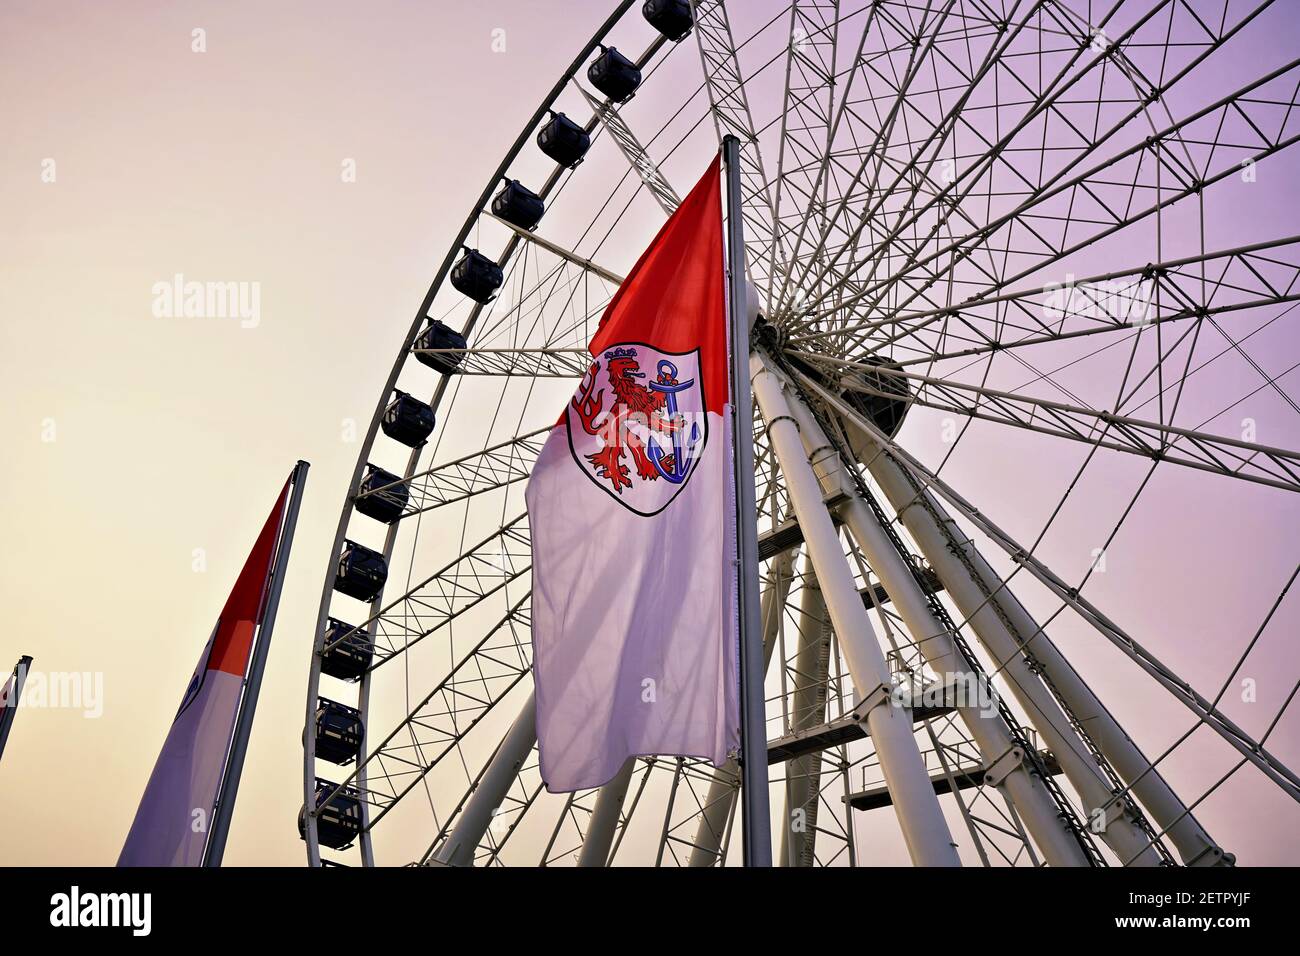 Ferris Wheel at sunset in Düsseldorf Old Town with flag of Northrhine-Westphalia in front. Stock Photo